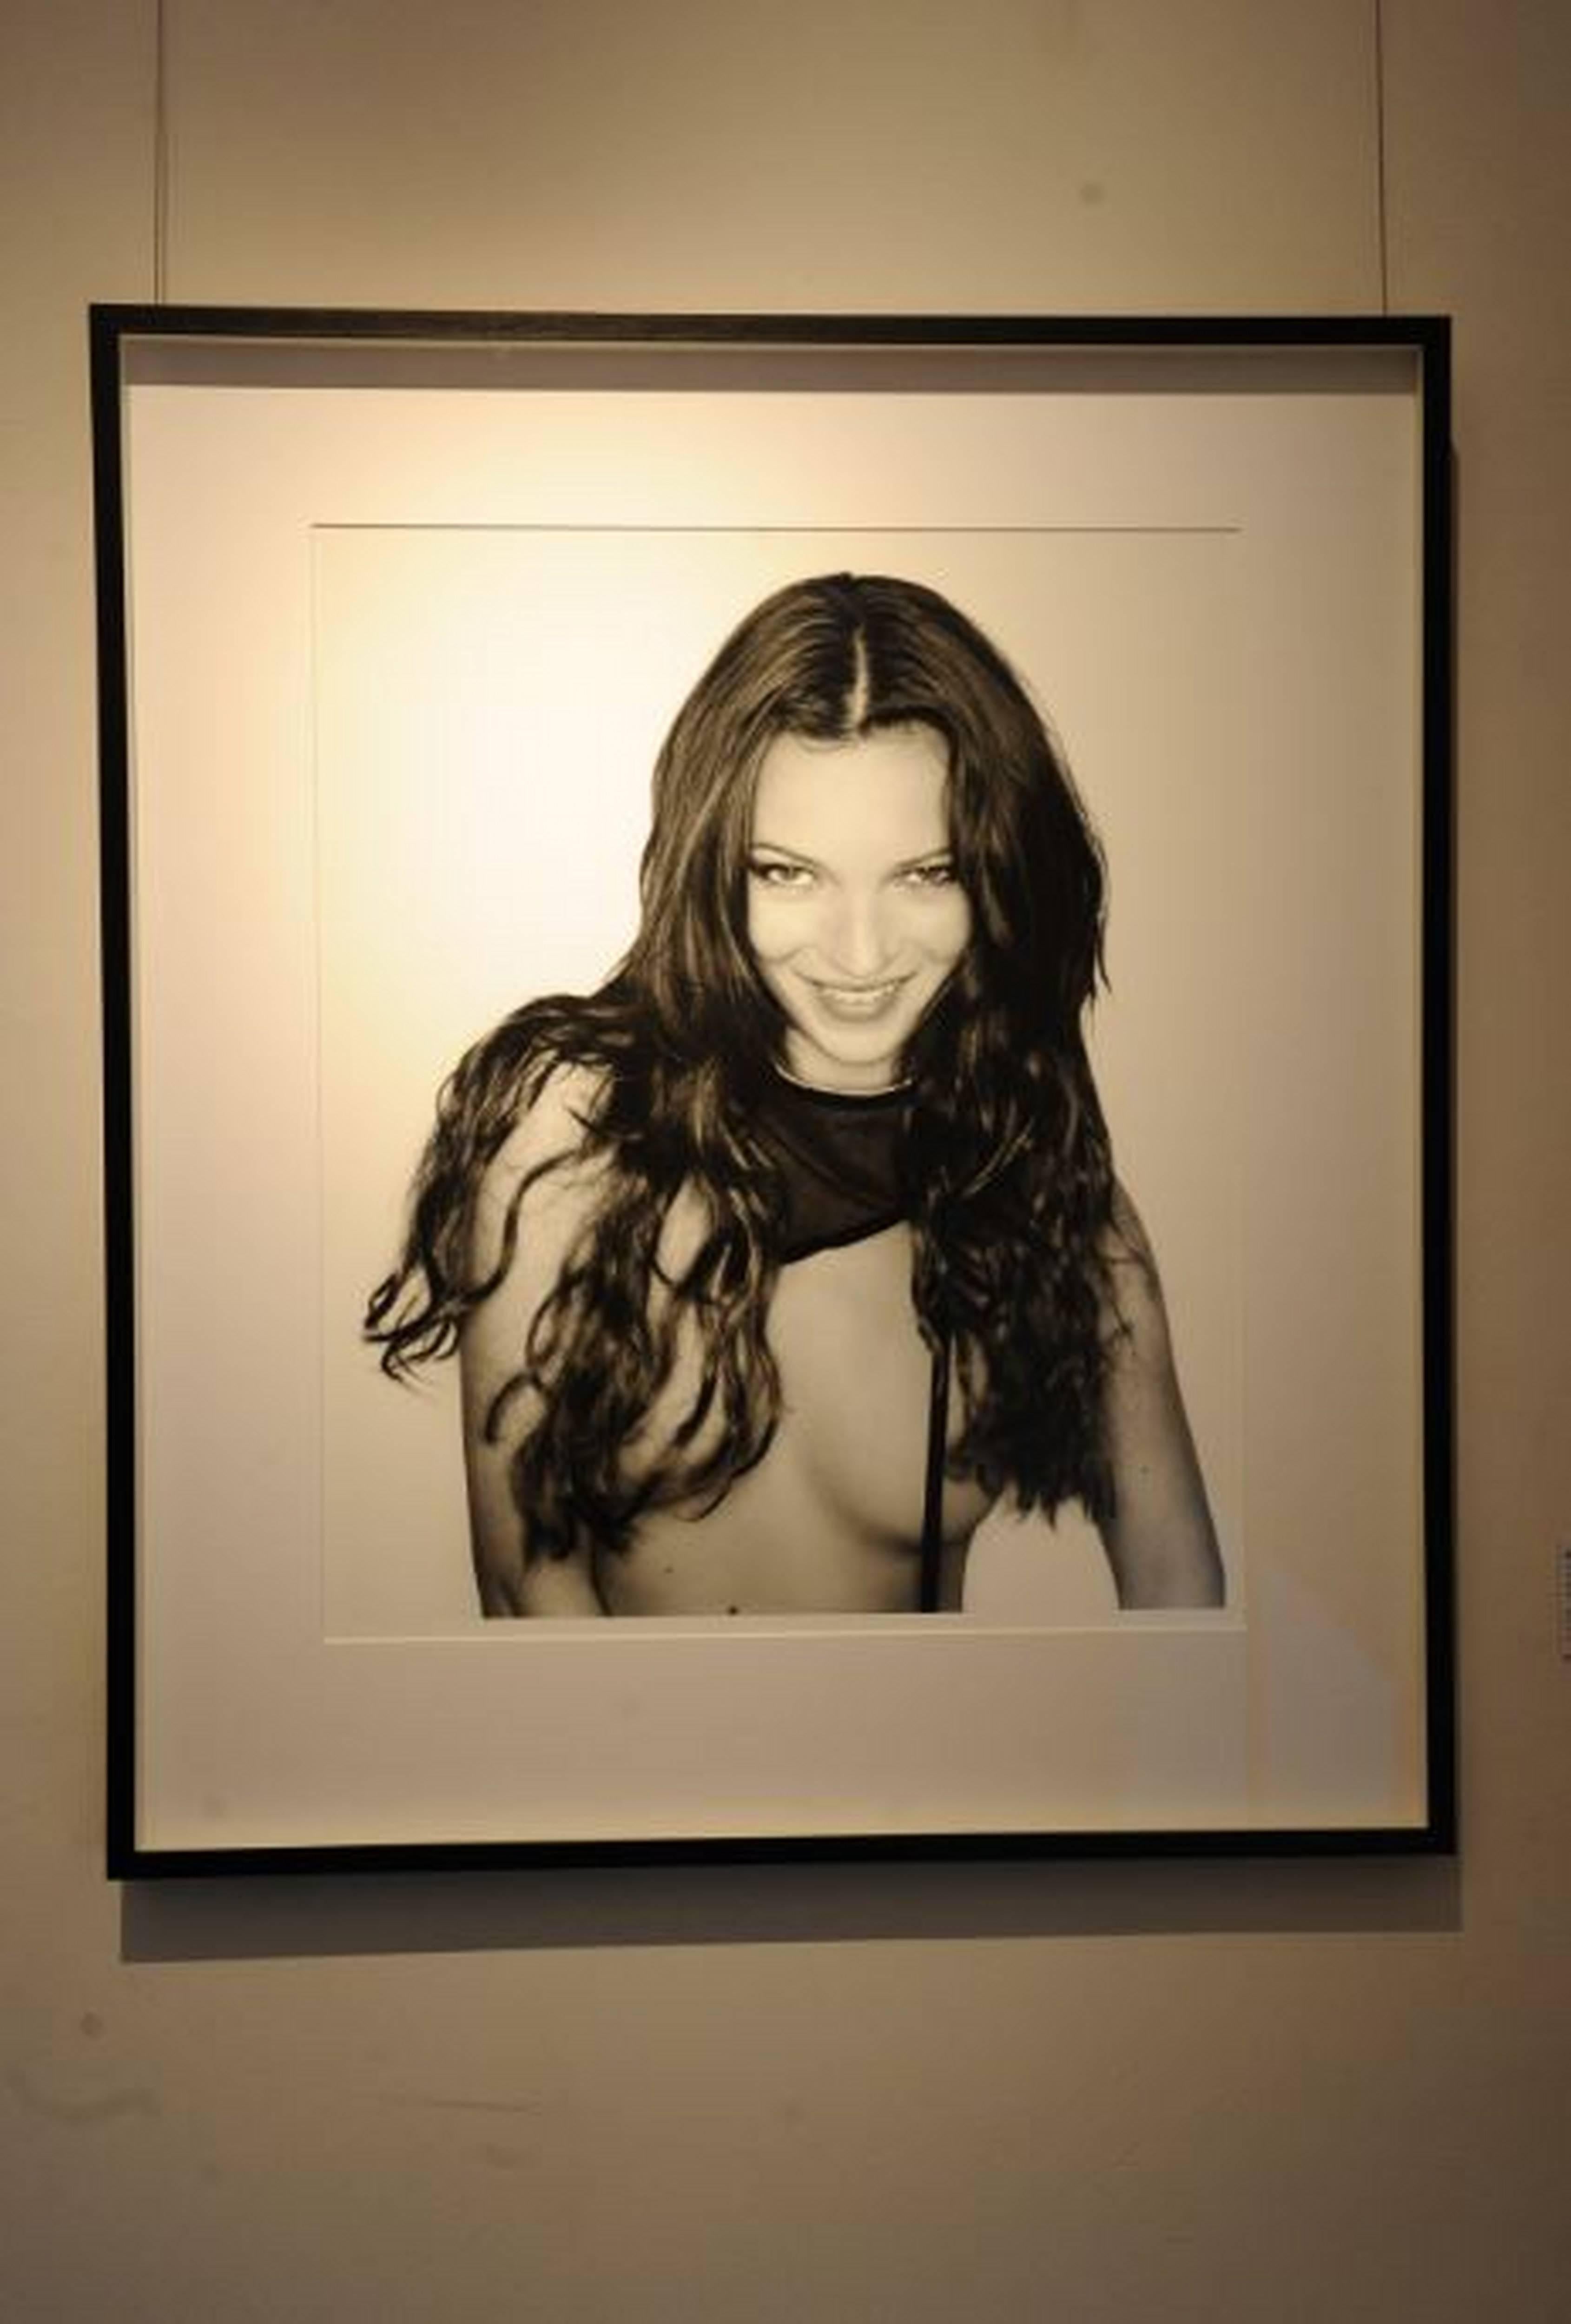 Cheeky Kate - nude portrait of supermodel Kate Moss, fine art photography, 1999 - Photograph by Rankin